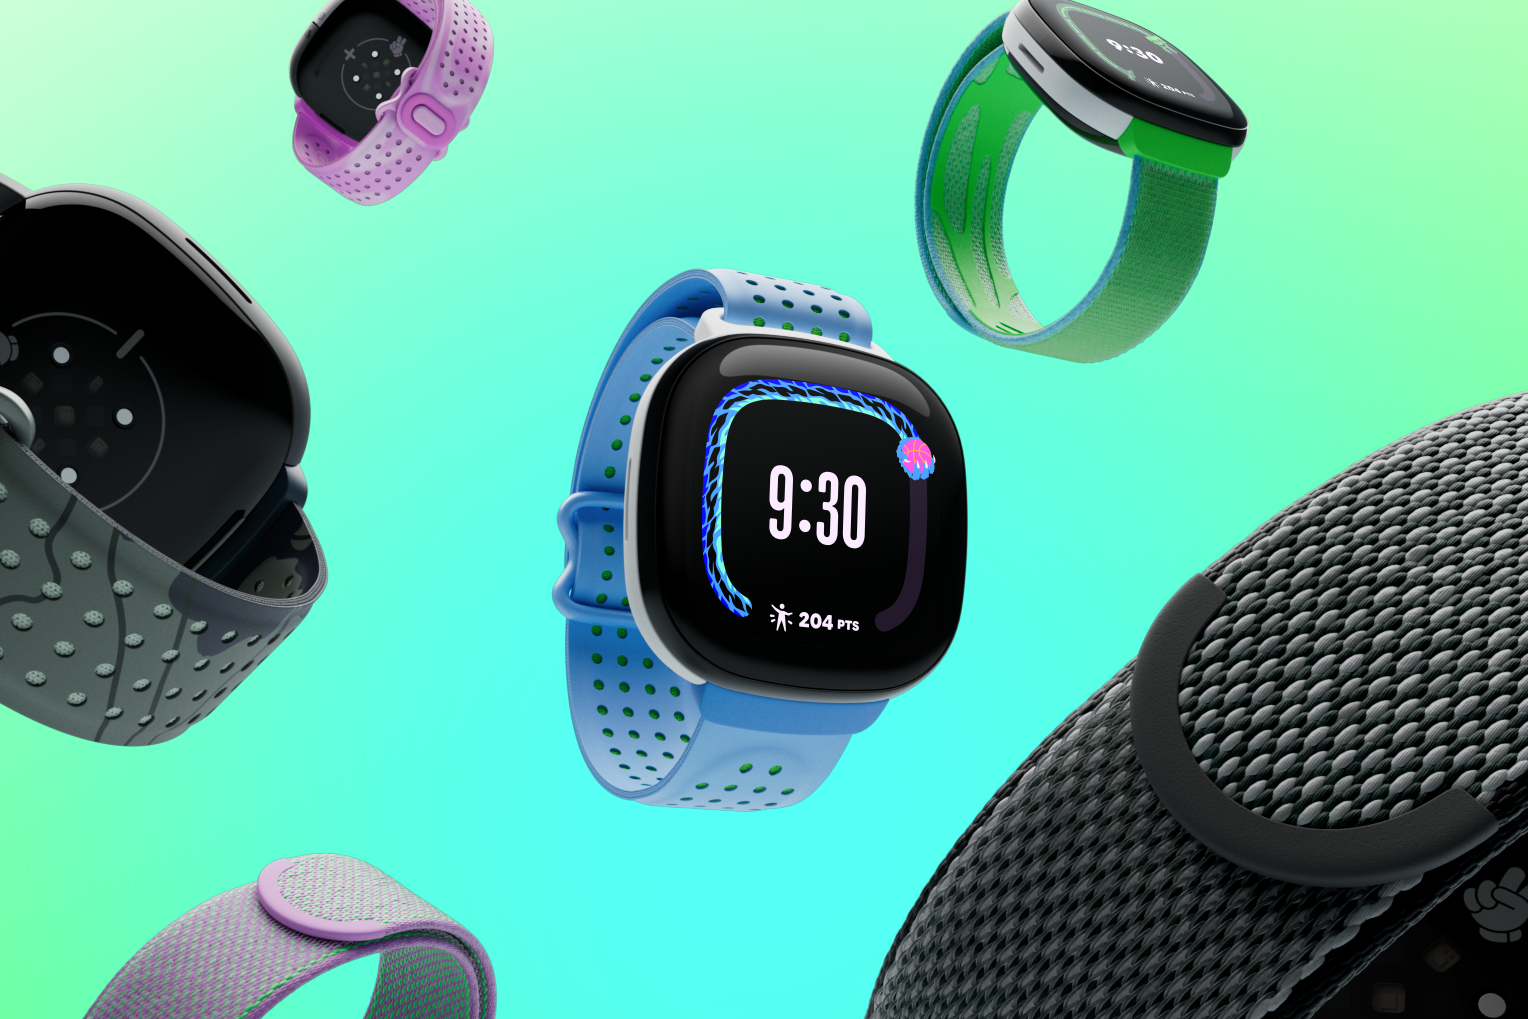 Render oficial del producto Fitbit Ace LTE.